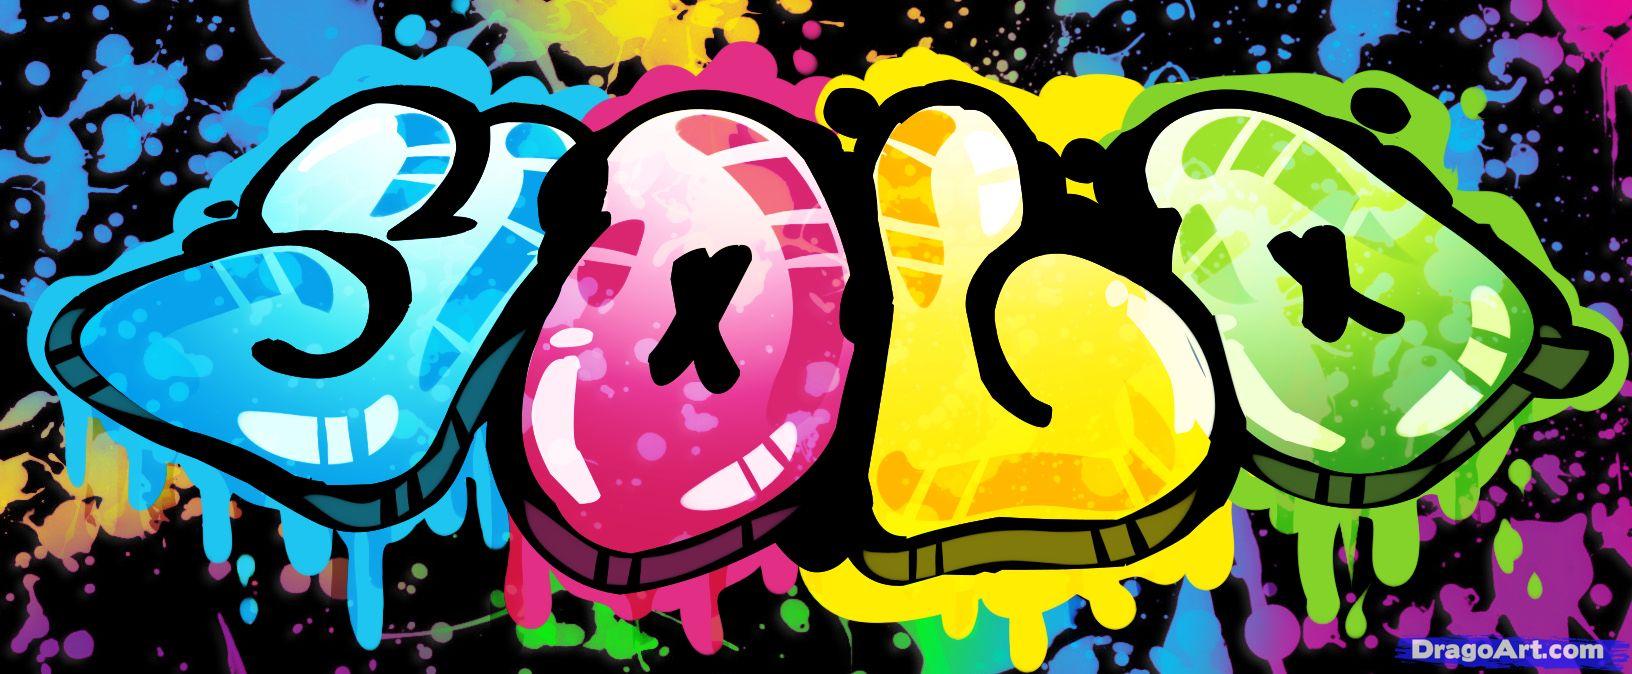 Graffiti Drawings Of Swag Wallpaper How To Draw Yolo, Yolo, Step